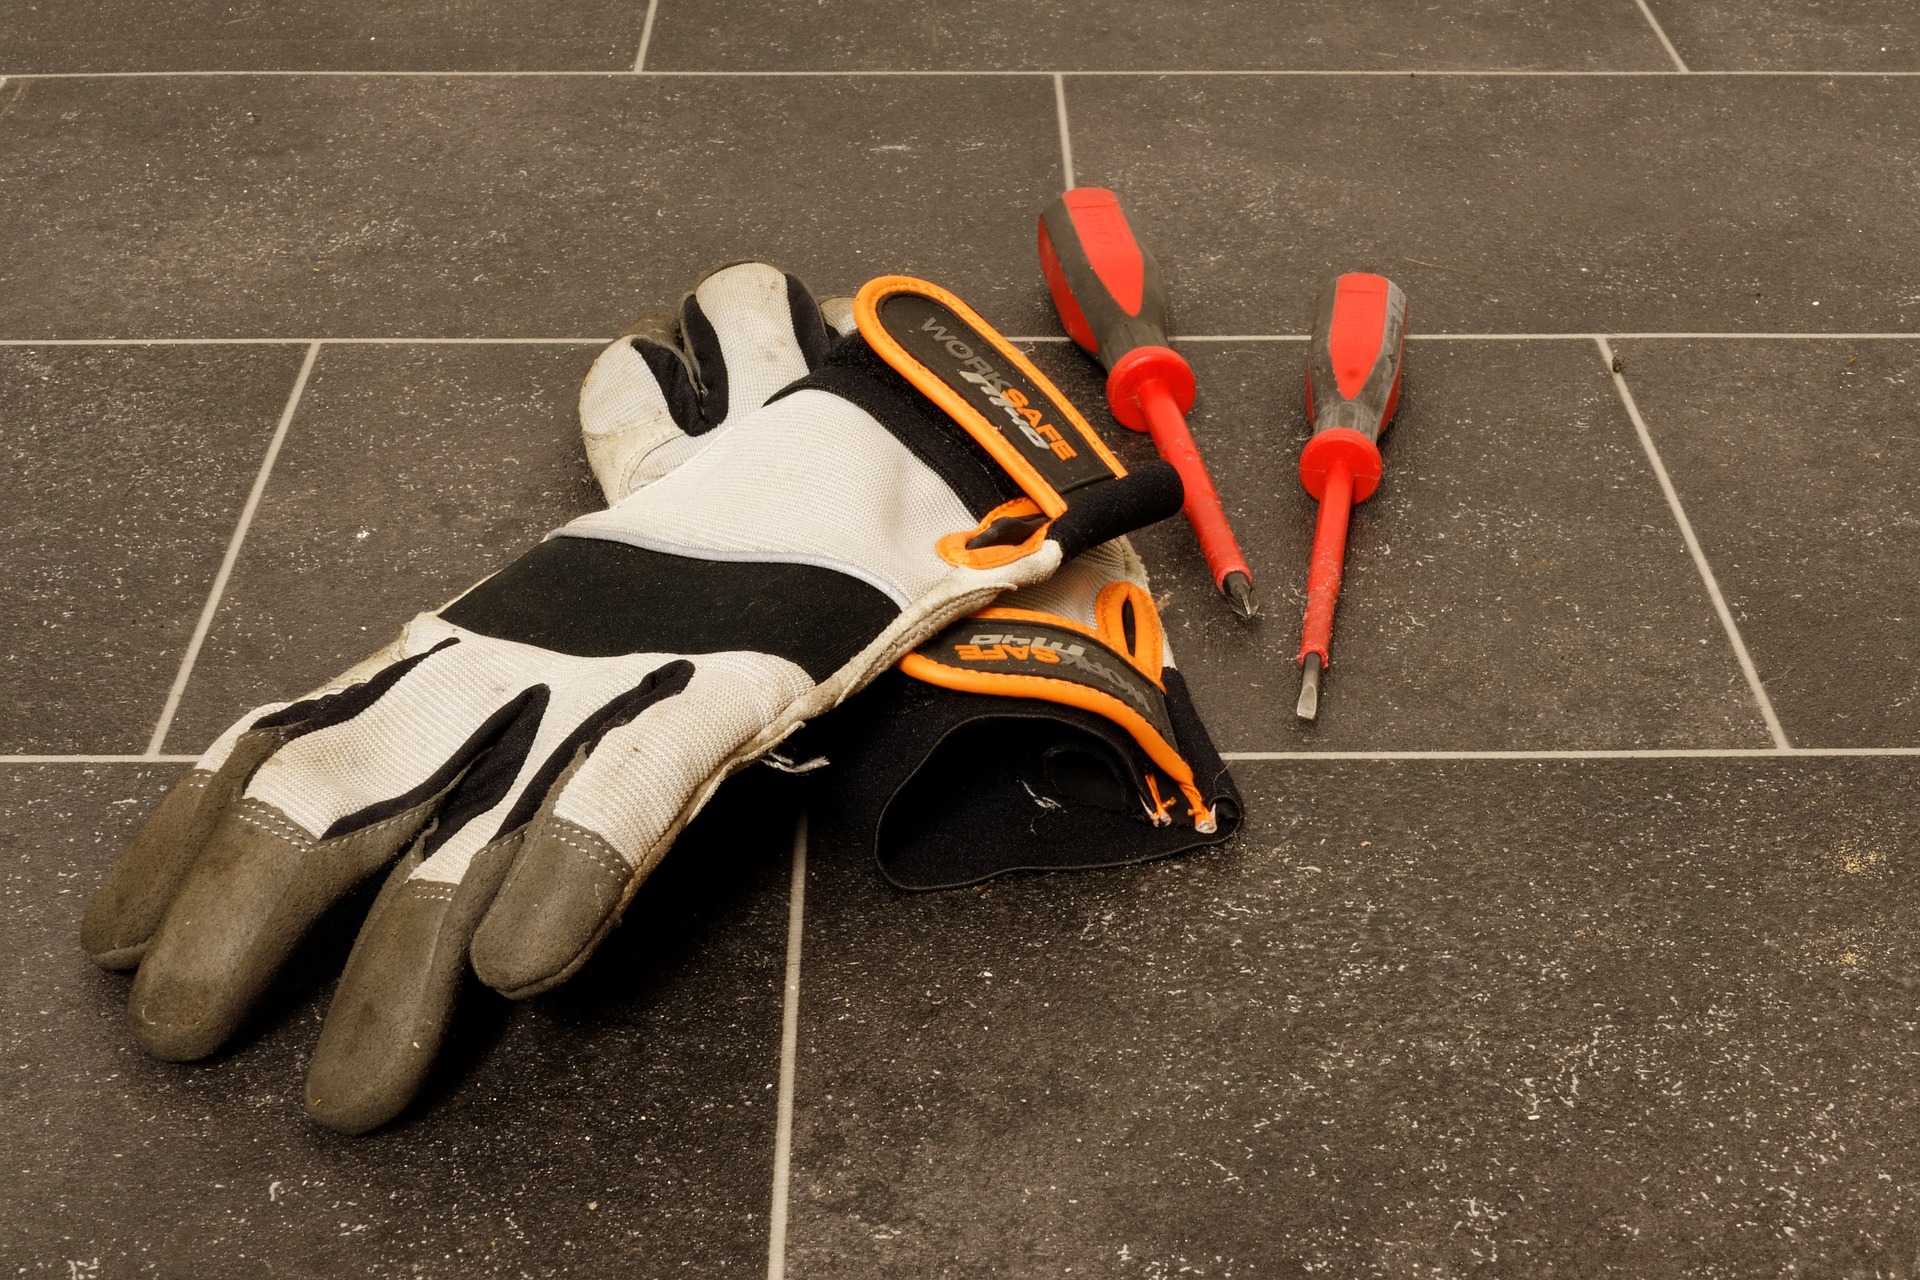 safety gloves next to two screwdrivers resting on the ground